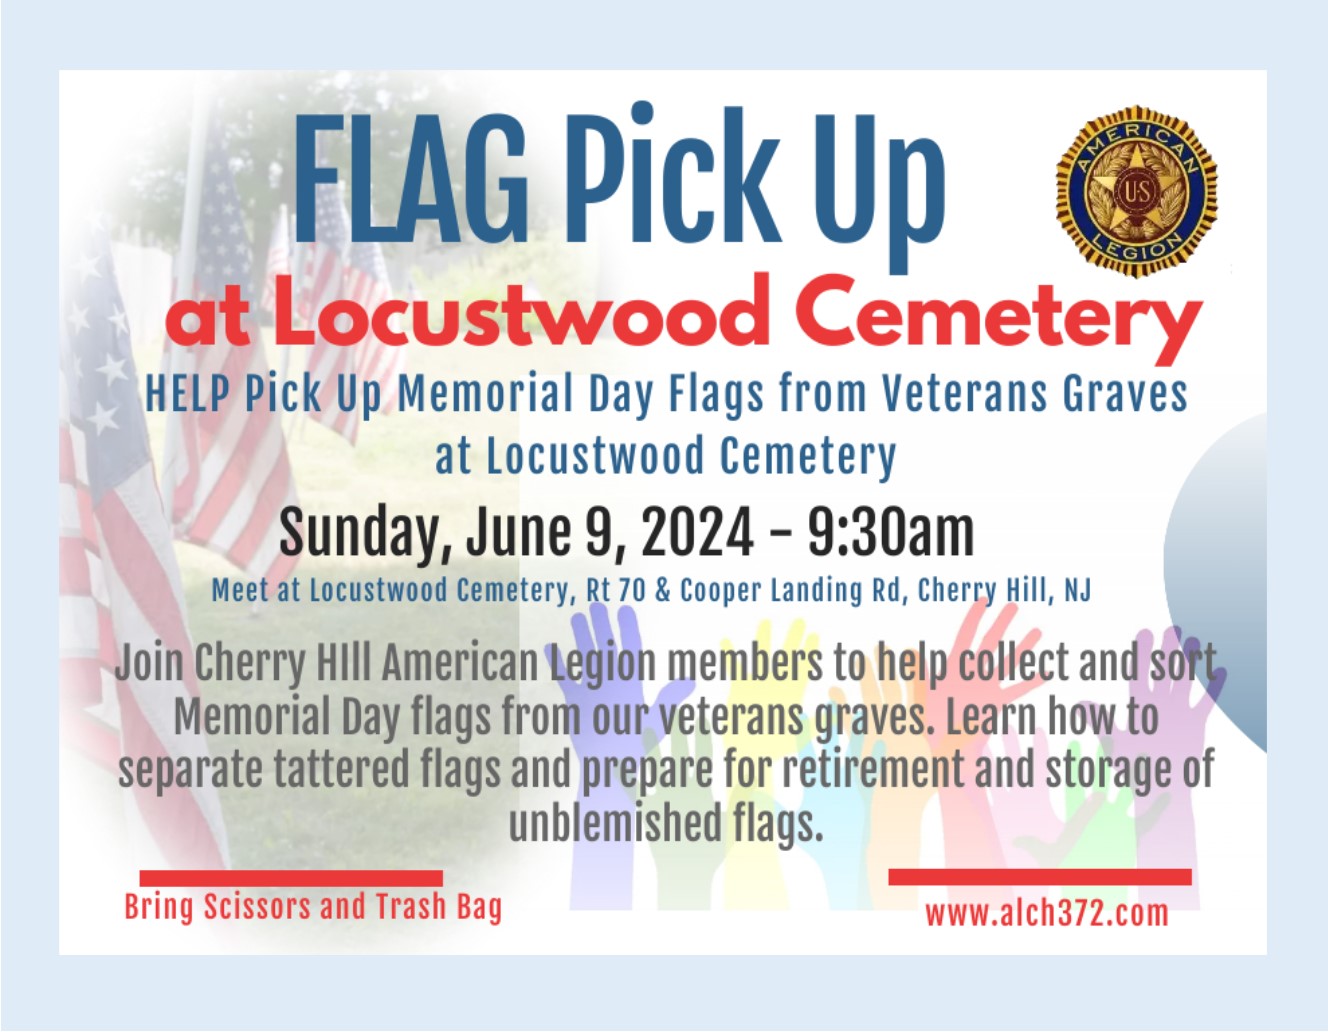 Flag Pick Up from veterans graves at Locustwood